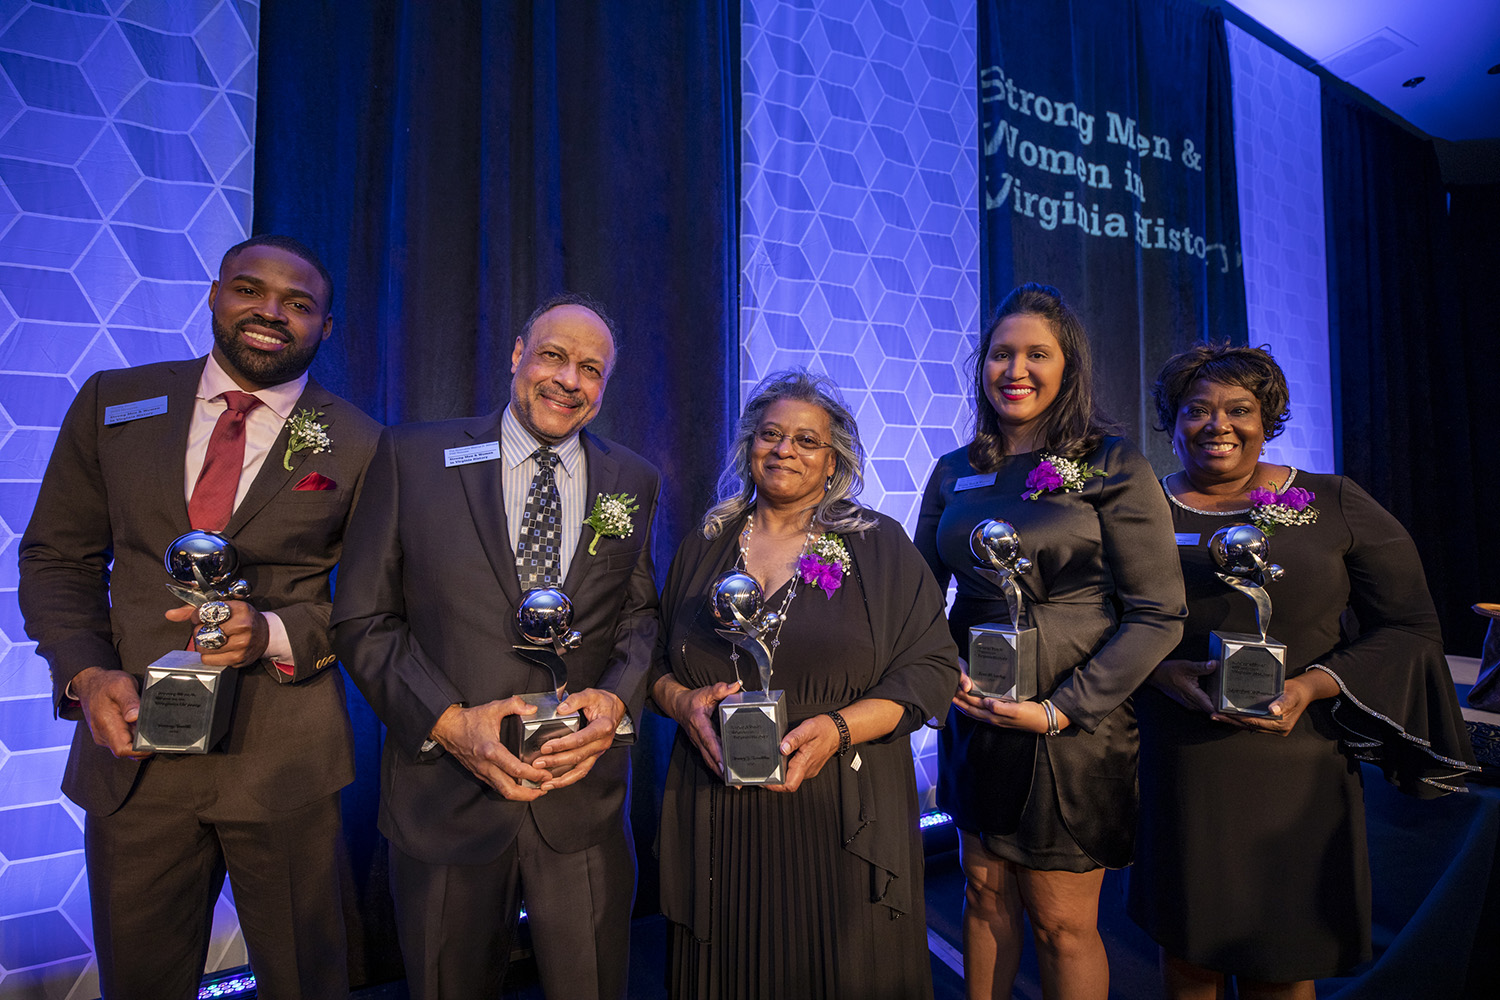 1. Five African-American leaders were recognized during the eighth annual “Strong Men & Women in Virginia History” awards program